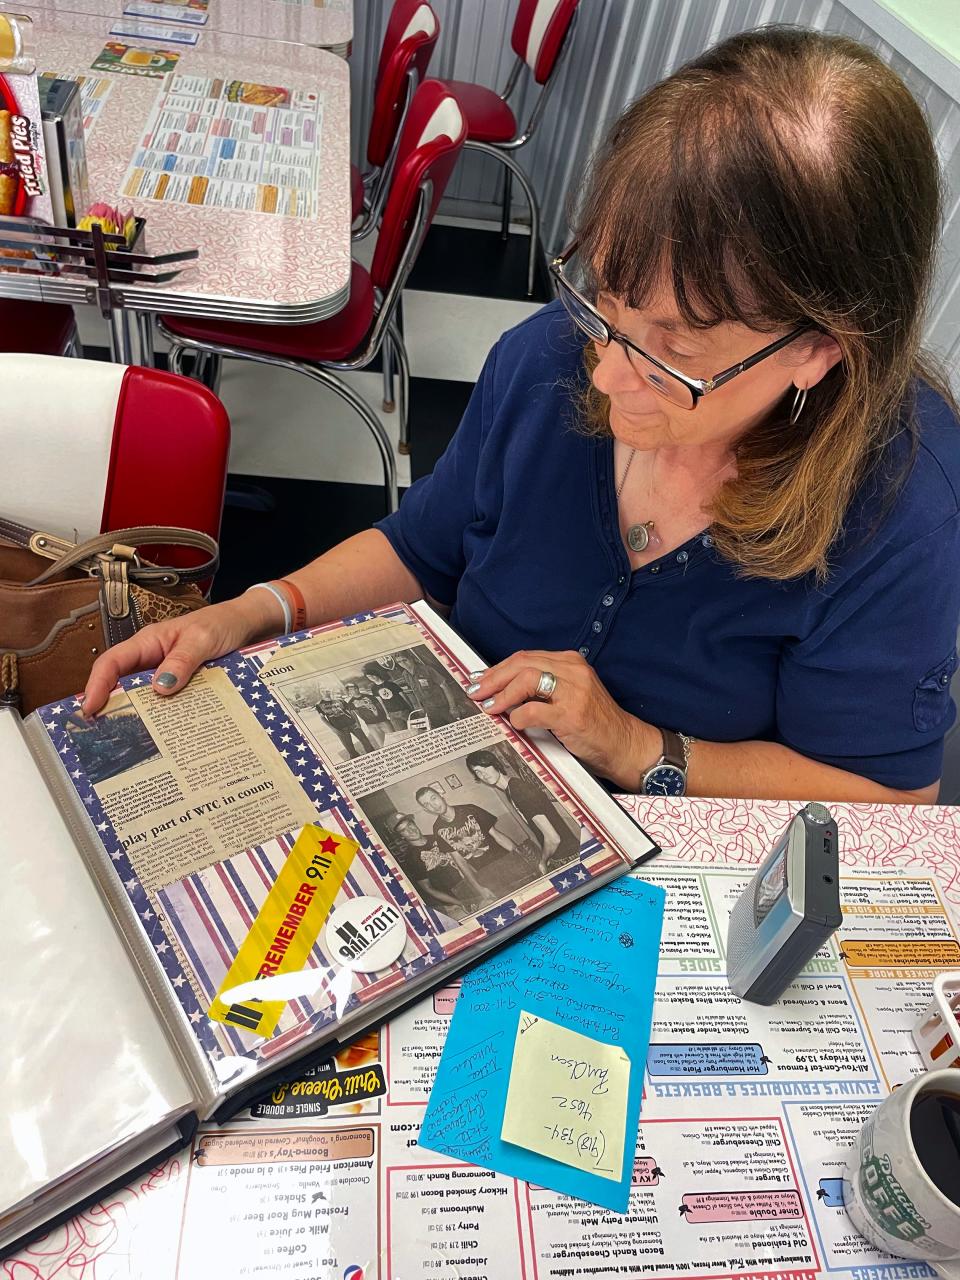 Nellie Garone, the high school teacher who coordinated the students' efforts to bring a 9/11 artifact to Milburn High School as their 2011 Class Legacy Project, looks over a scrapbook that documents their efforts.